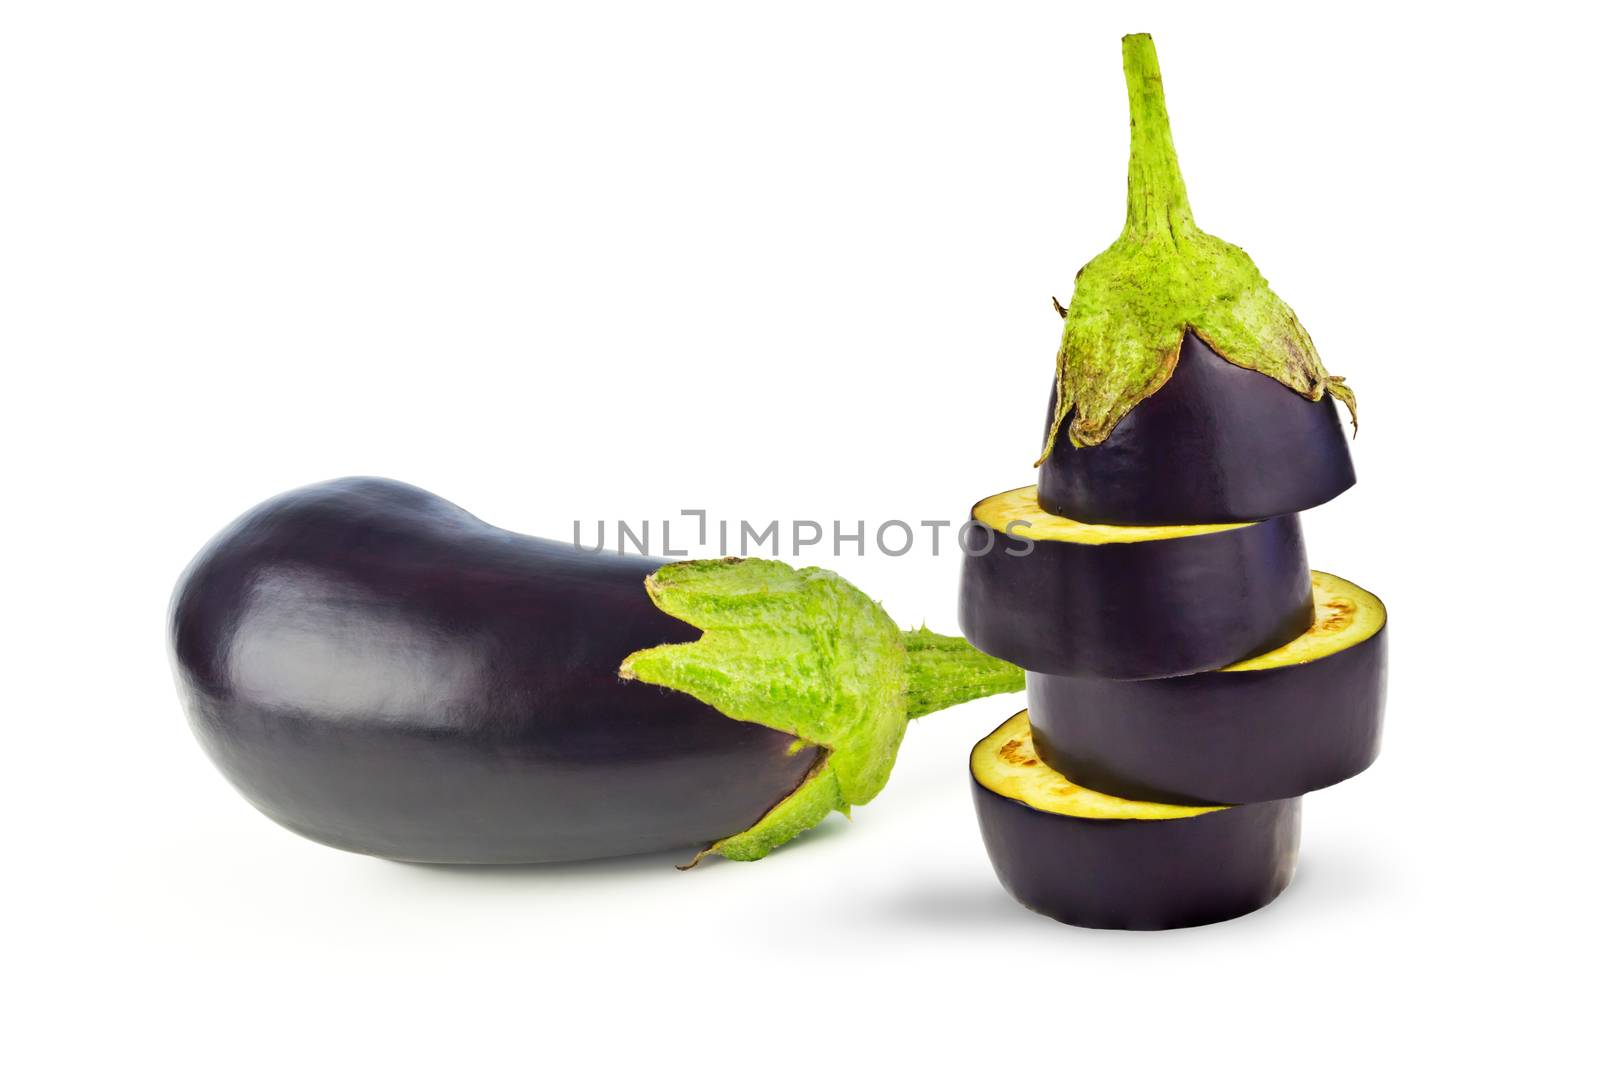 One eggplant and four slices isolated on white background